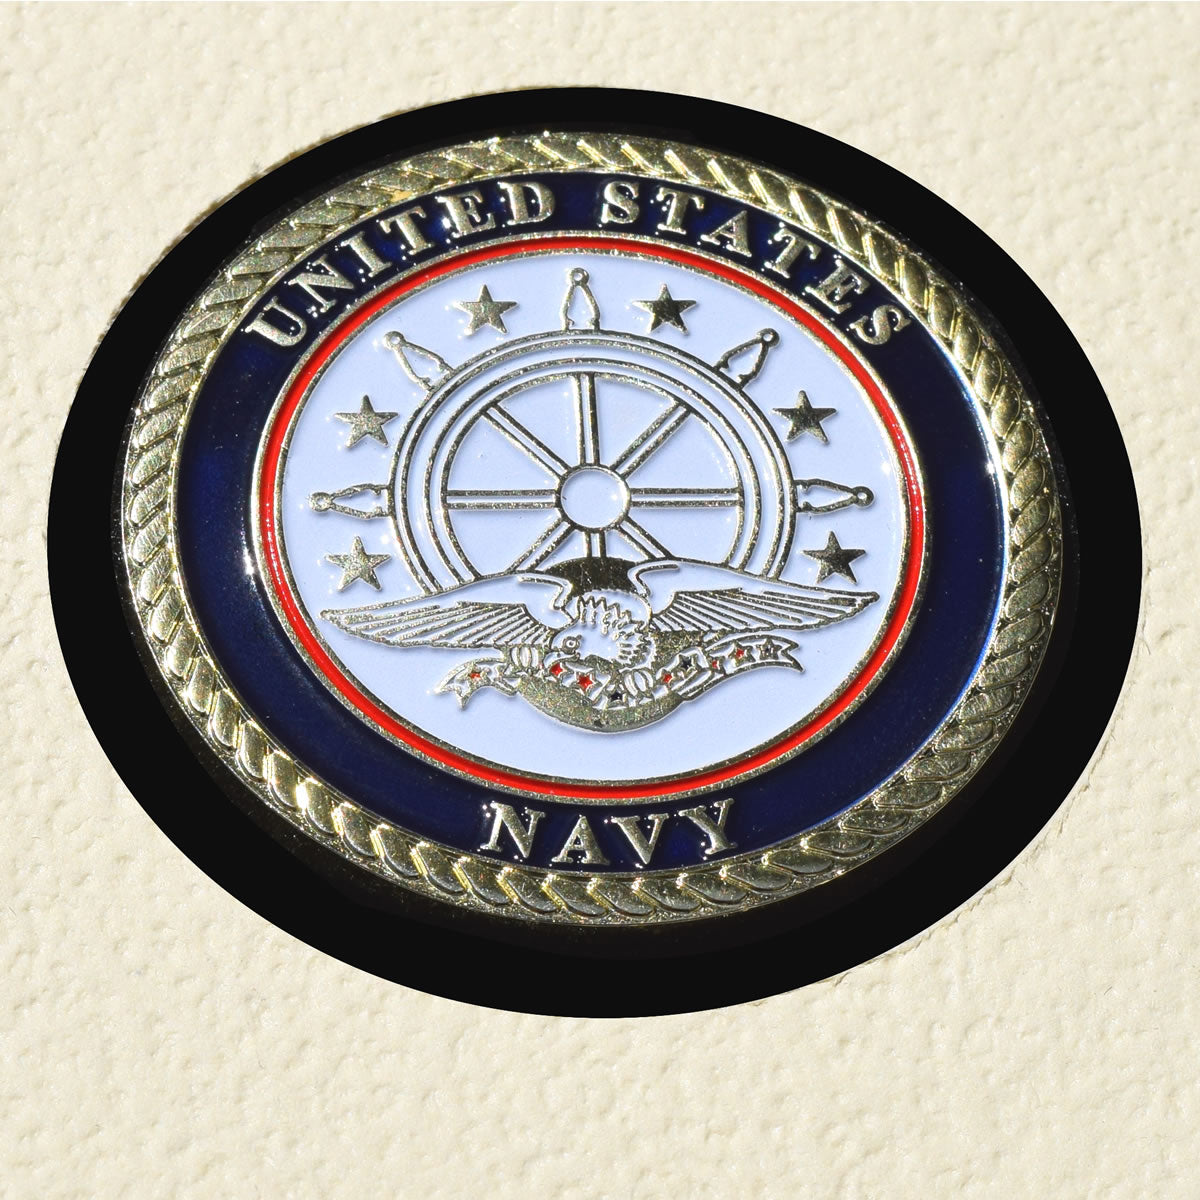 USS VALLEY FORGE CV-45 Detailed Coin